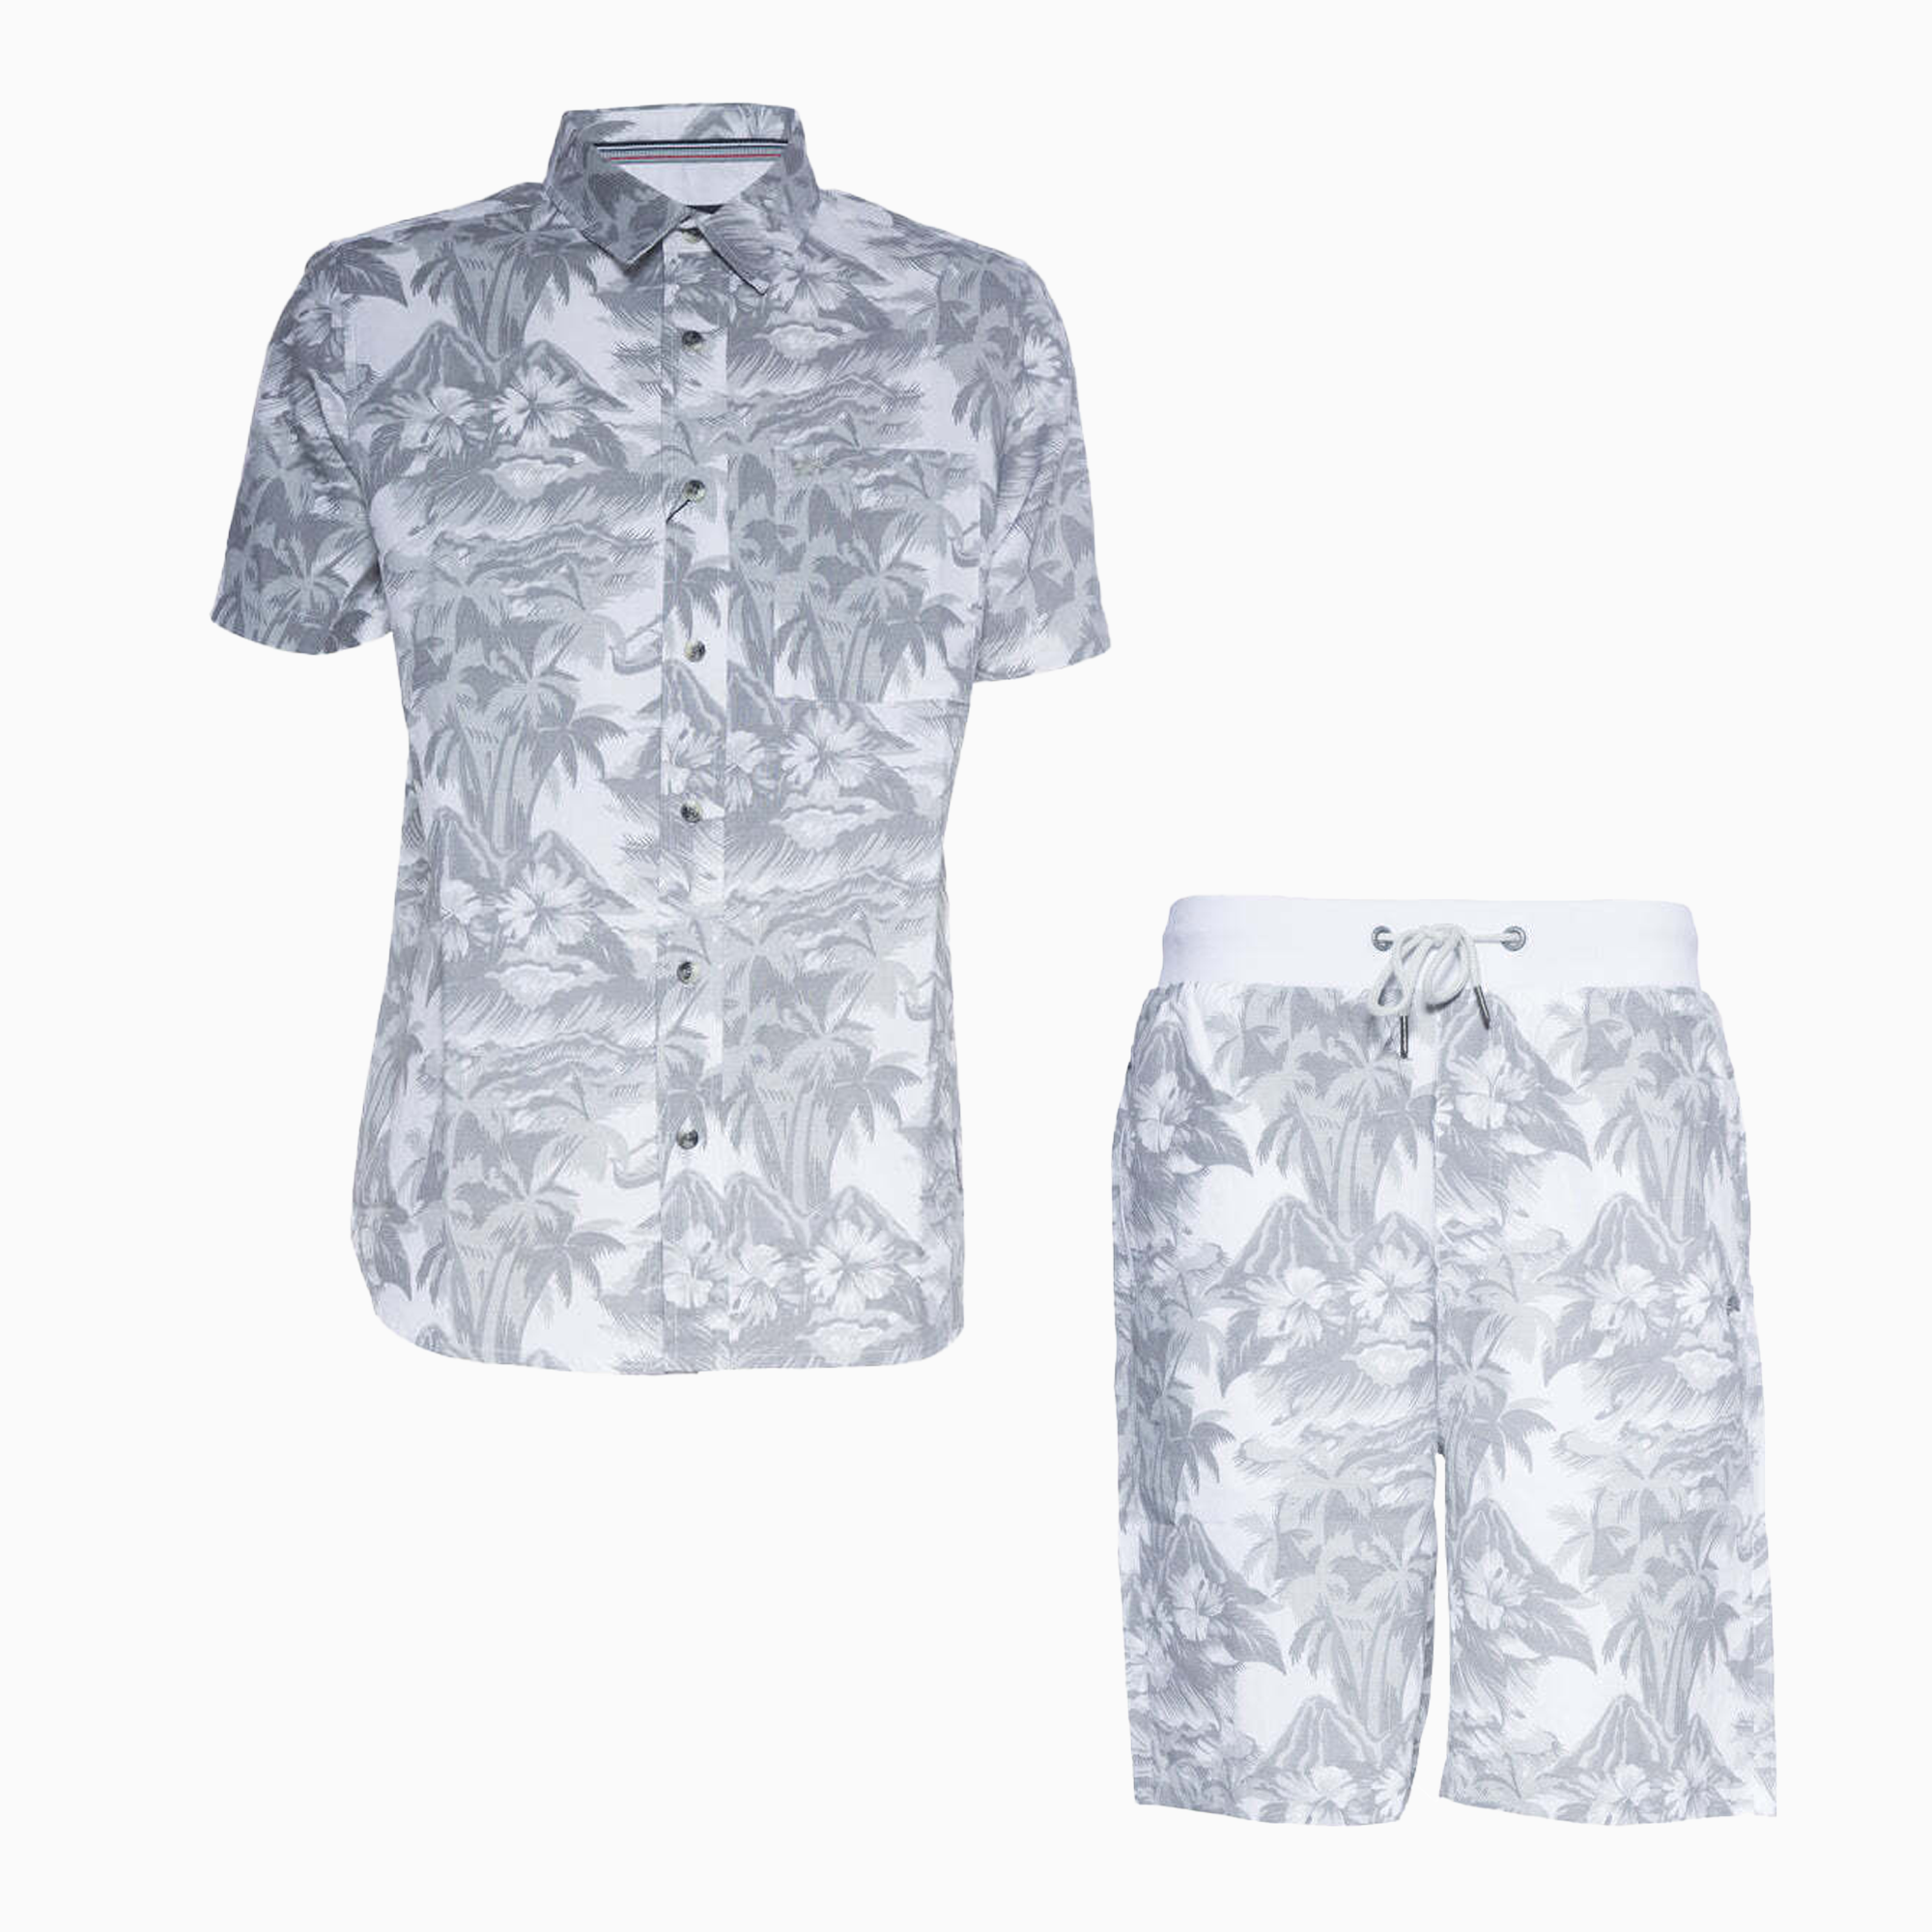 a-tiziano-mens-printed-linen-shirt-and-shorts-outfit-42atm3203-drizzle-42atm1403-drizzle